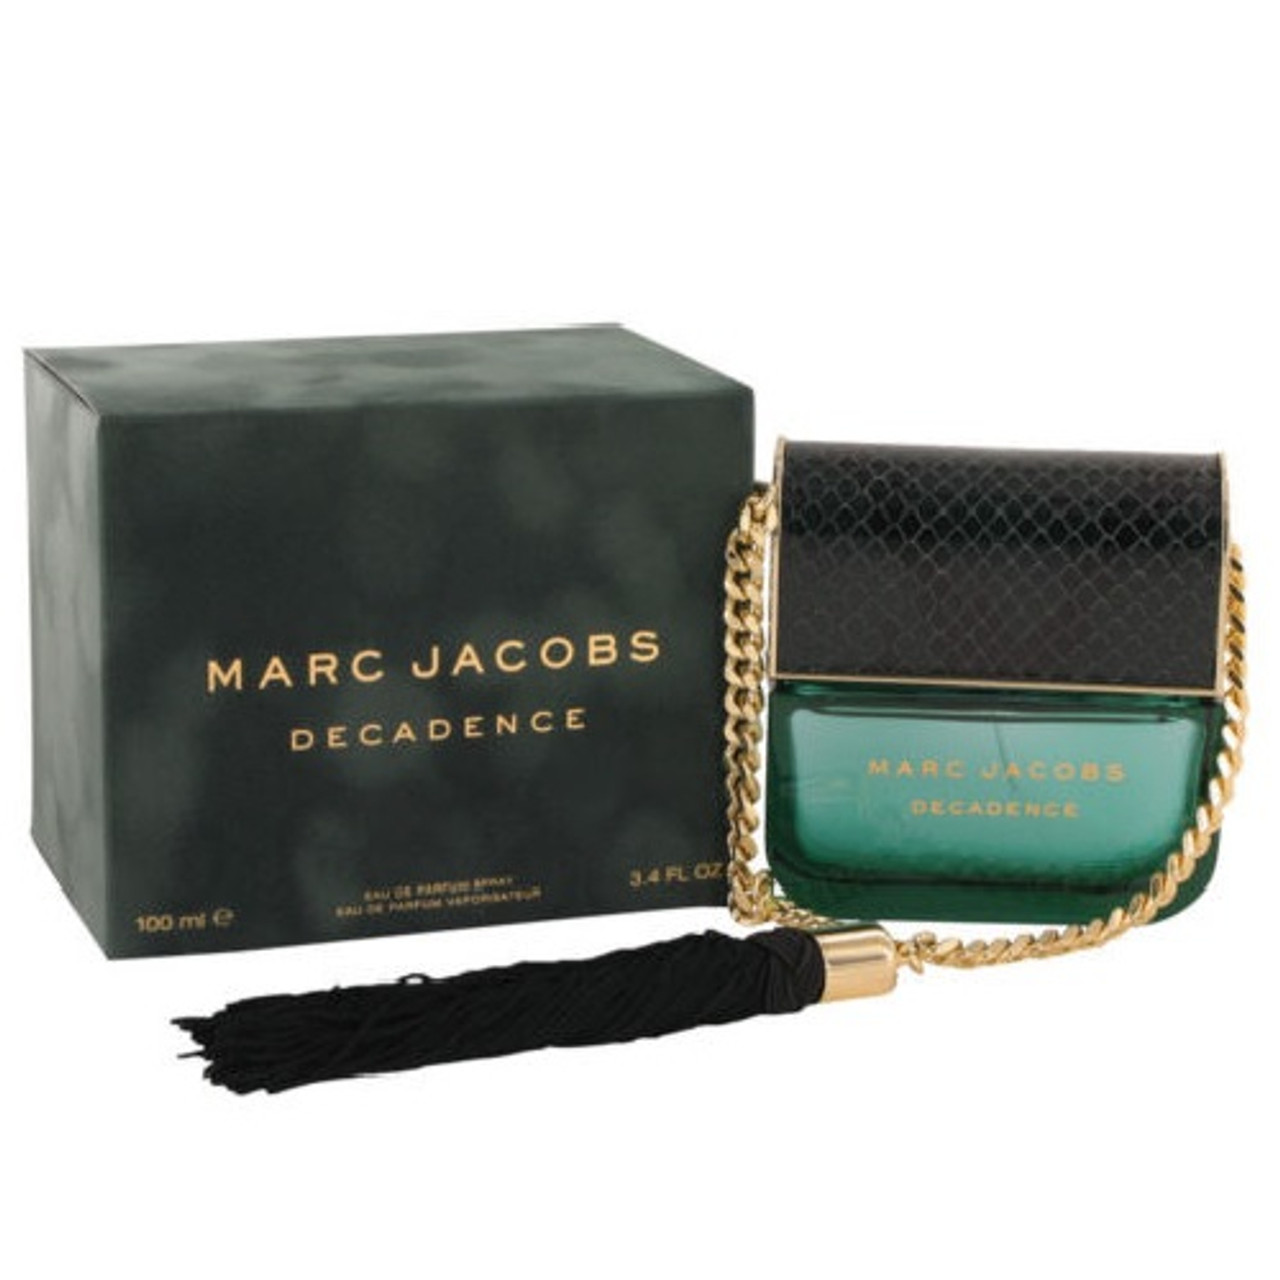 Kwade trouw Paard Kantine Marc Jacobs Decadence by Marc Jacobs 3.4 oz EDP for women - ForeverLux